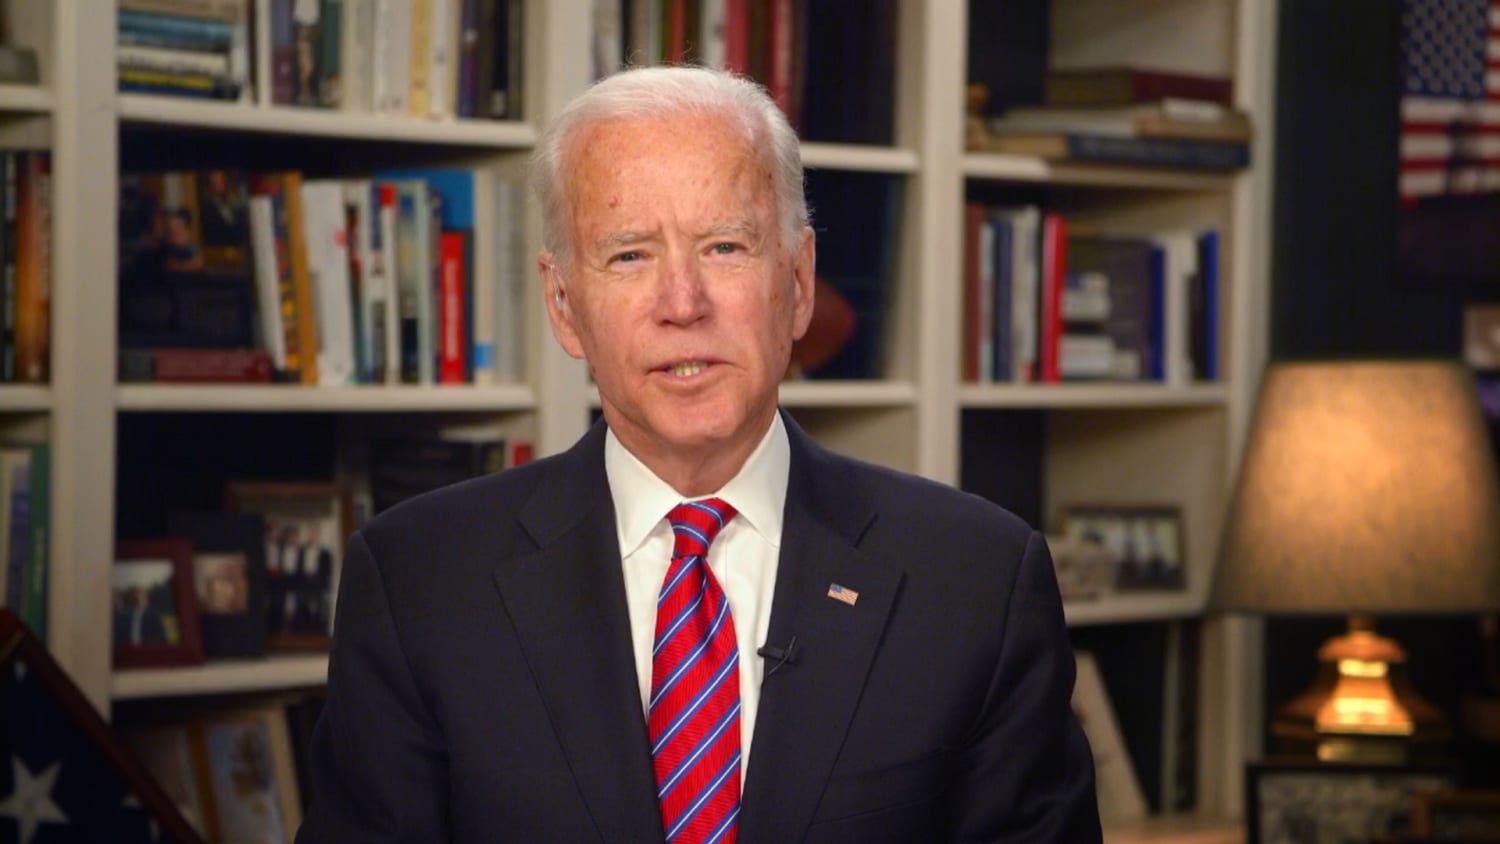 Biden debuts podcast in his virtual campaign for president